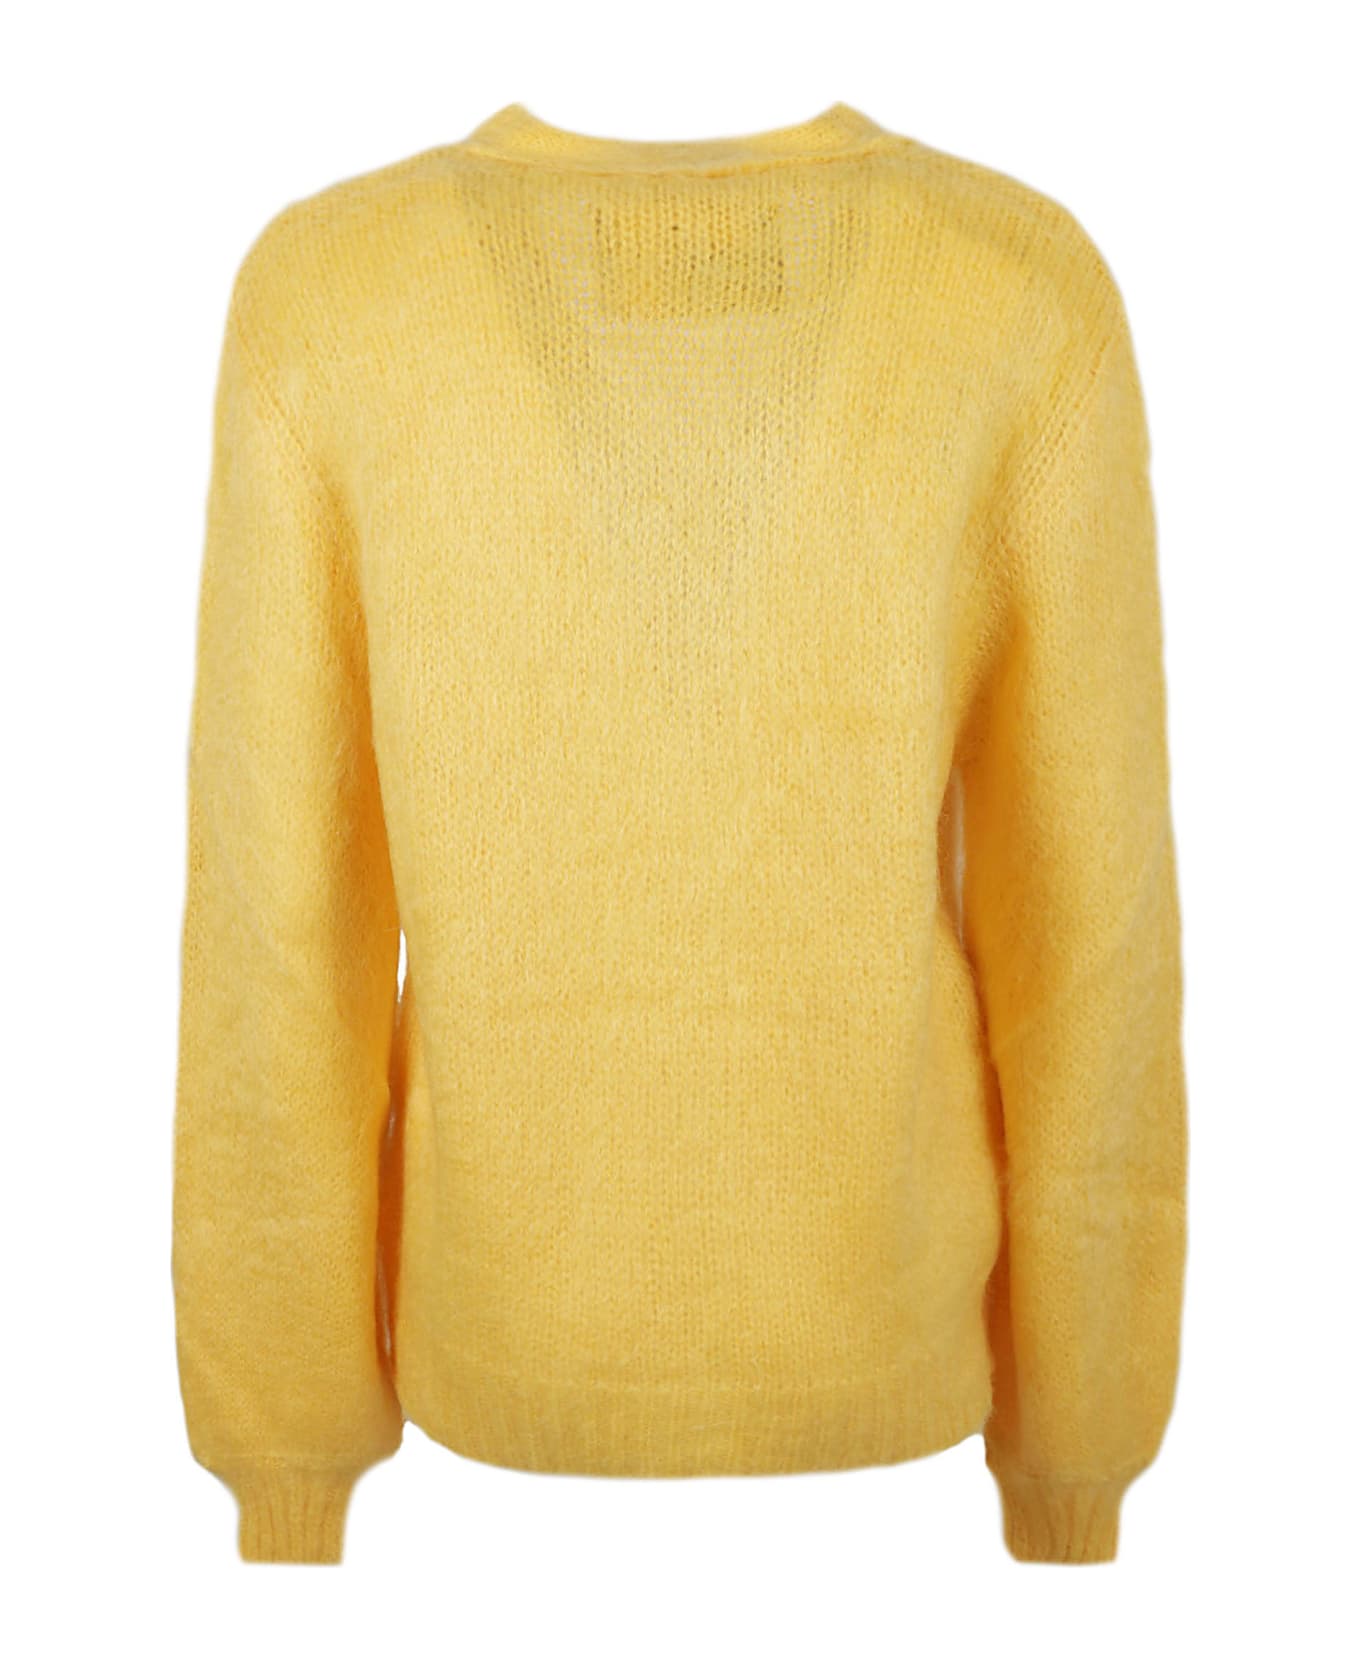 Marni Solid Color Brushed Fuzzy Wuzzy Cardigan - YELLOW